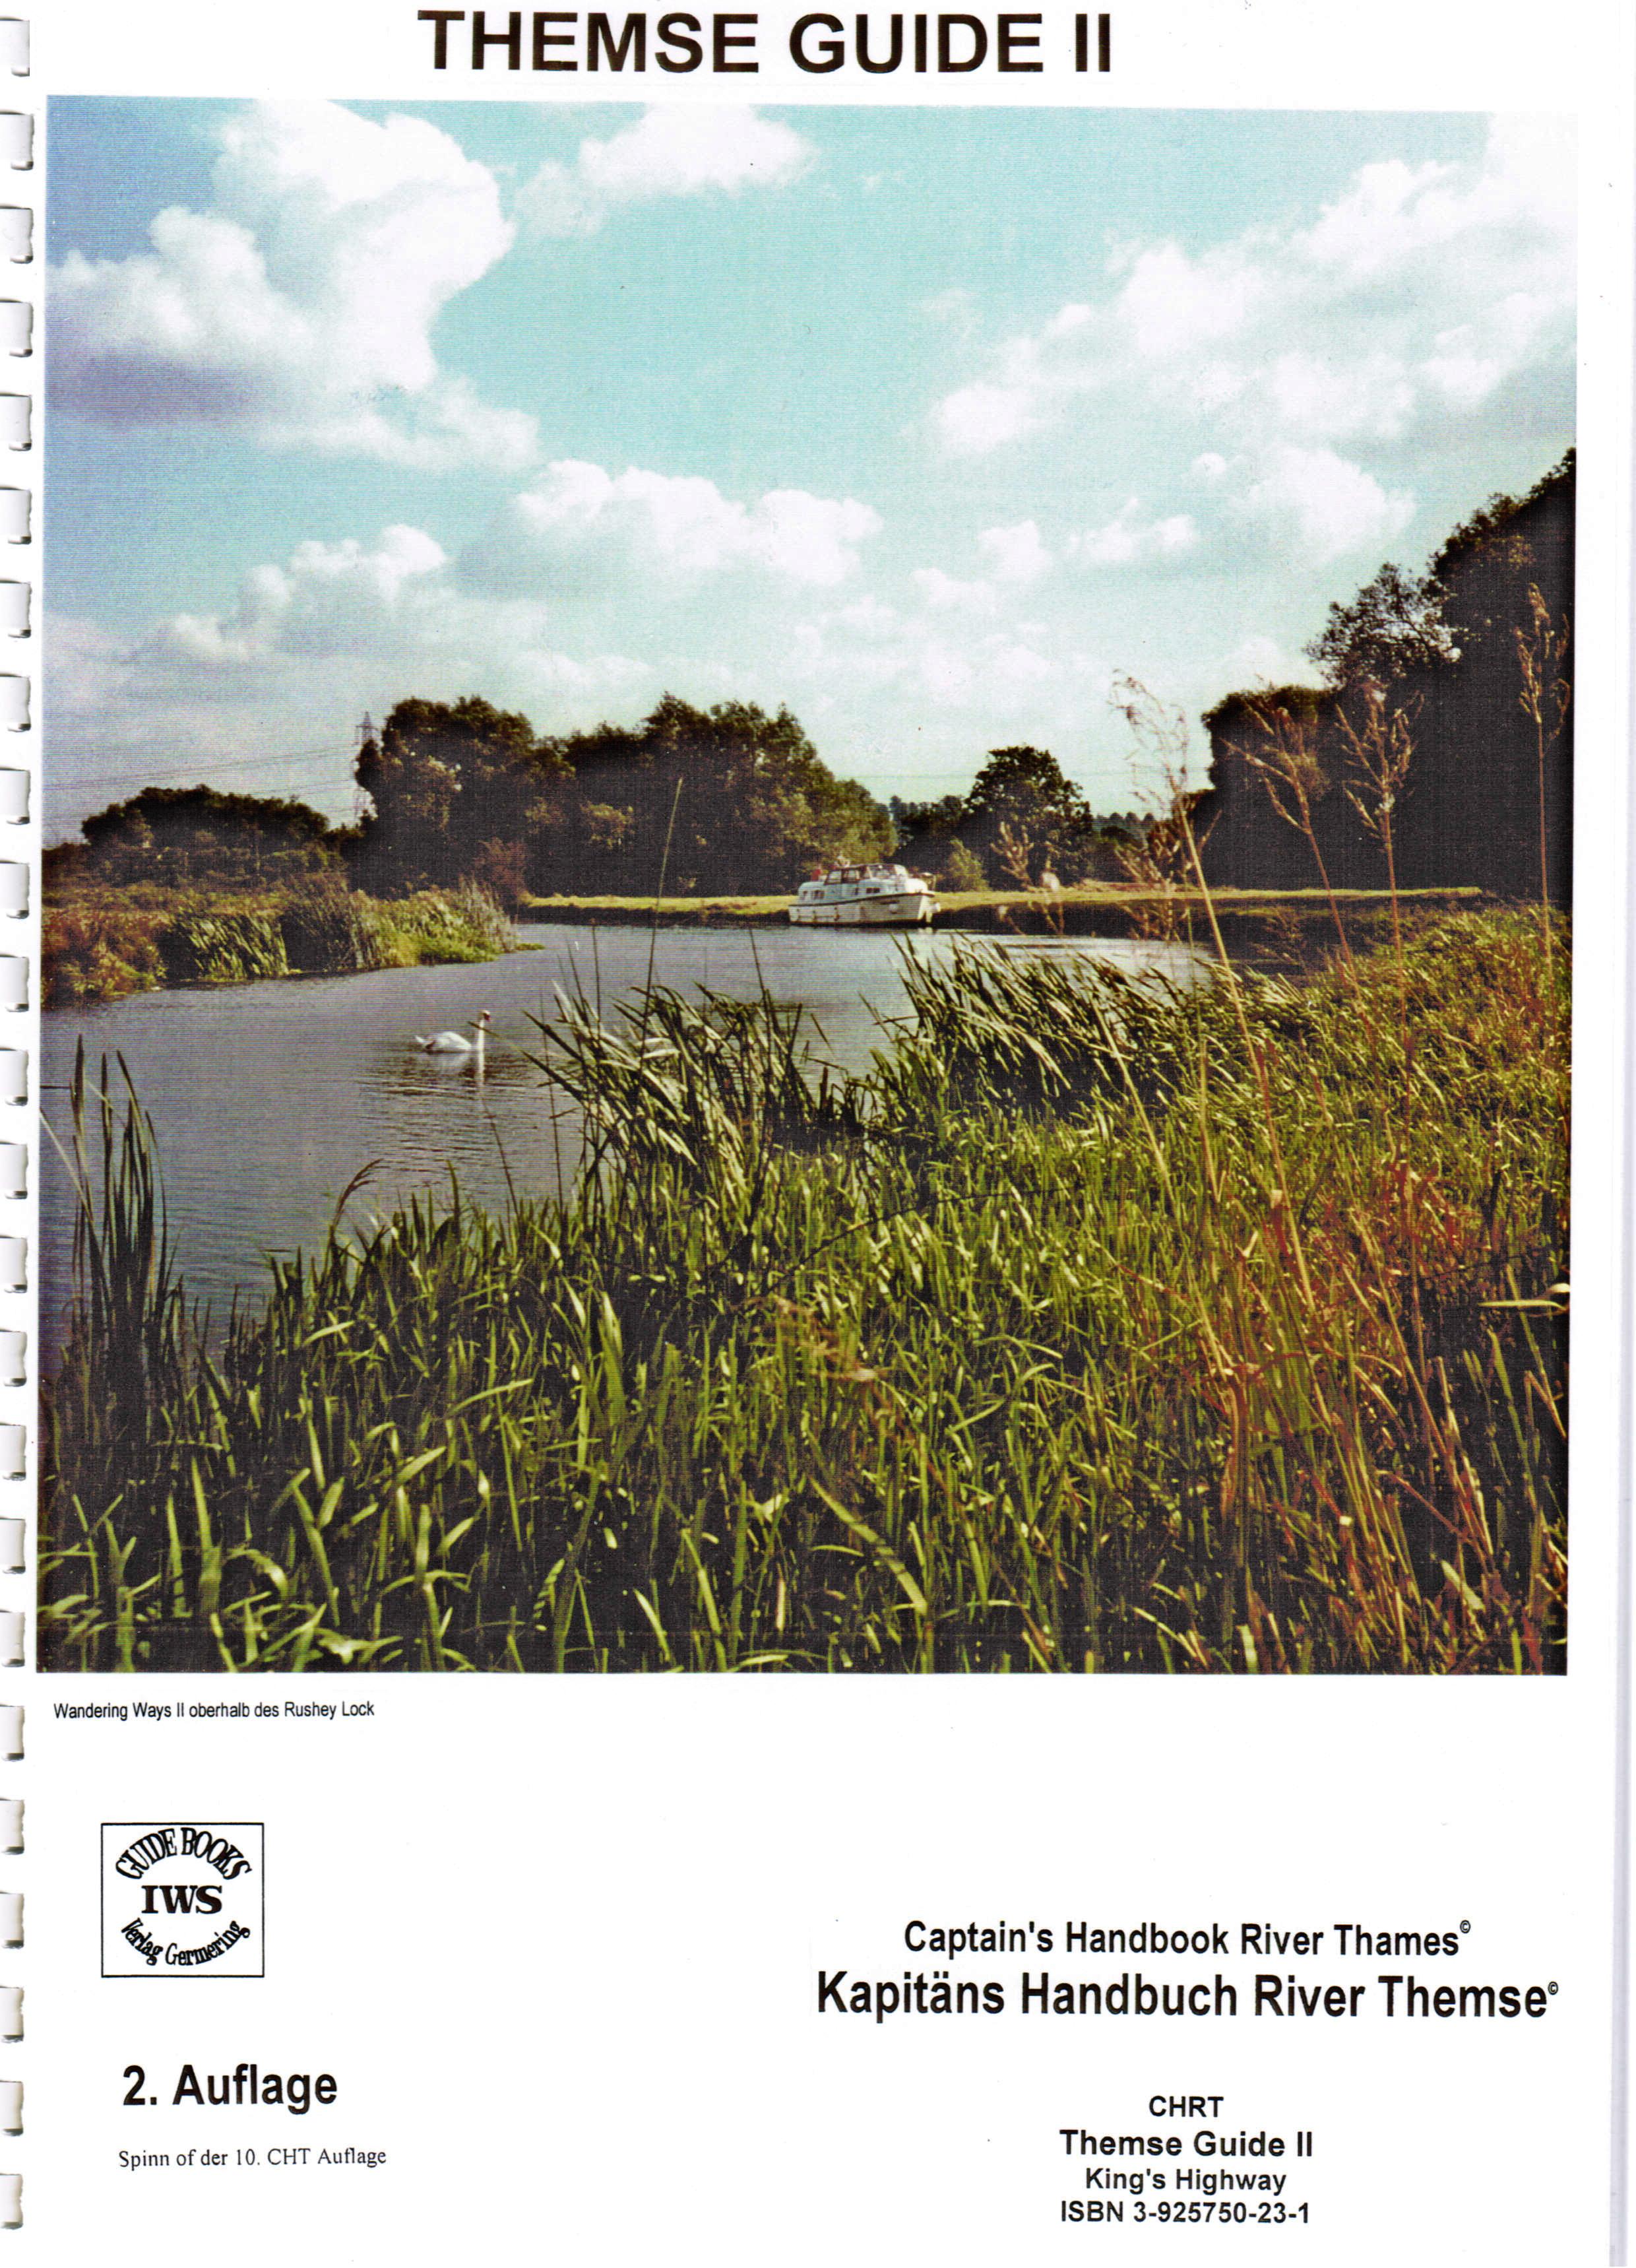 River Thames (Themse), Thames Guide (c) IWS Verlag, Inland Waterways Service (IWS)